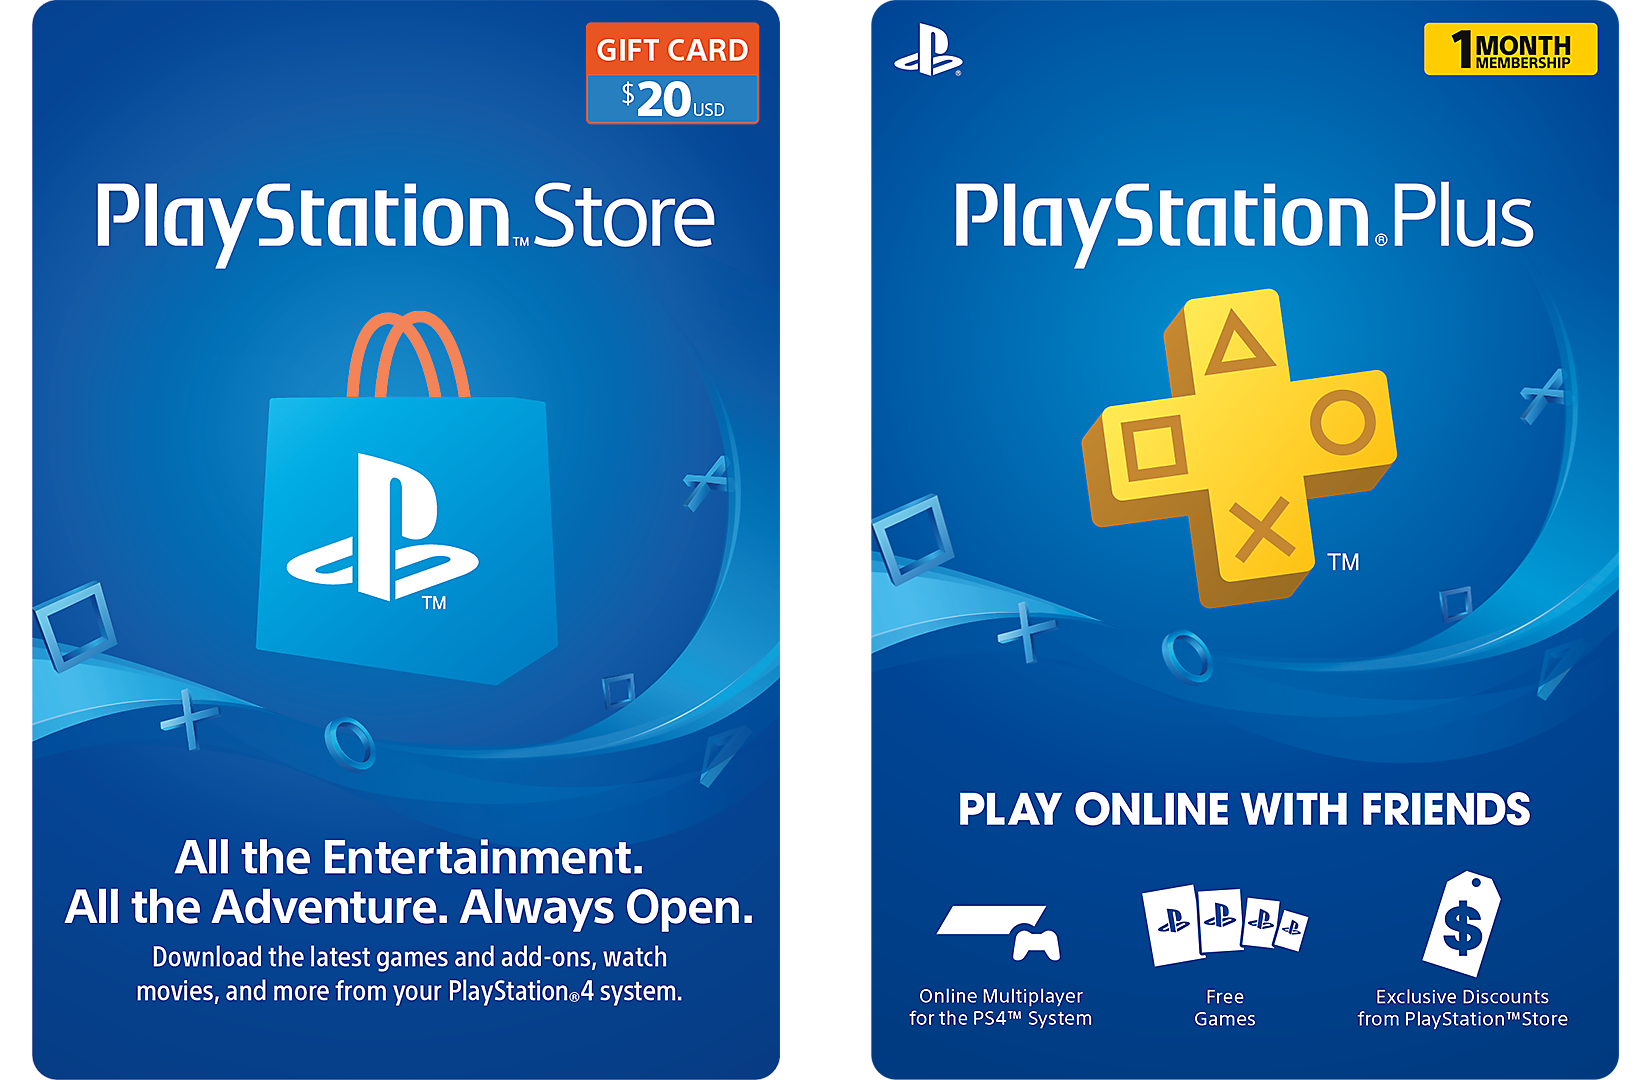 Playstation store turkey ps plus. Sony PLAYSTATION Plus для ps4. PLAYSTATION Plus Gift Card. Подписка PS Plus на ps4. PLAYSTATION Plus Extra карта.